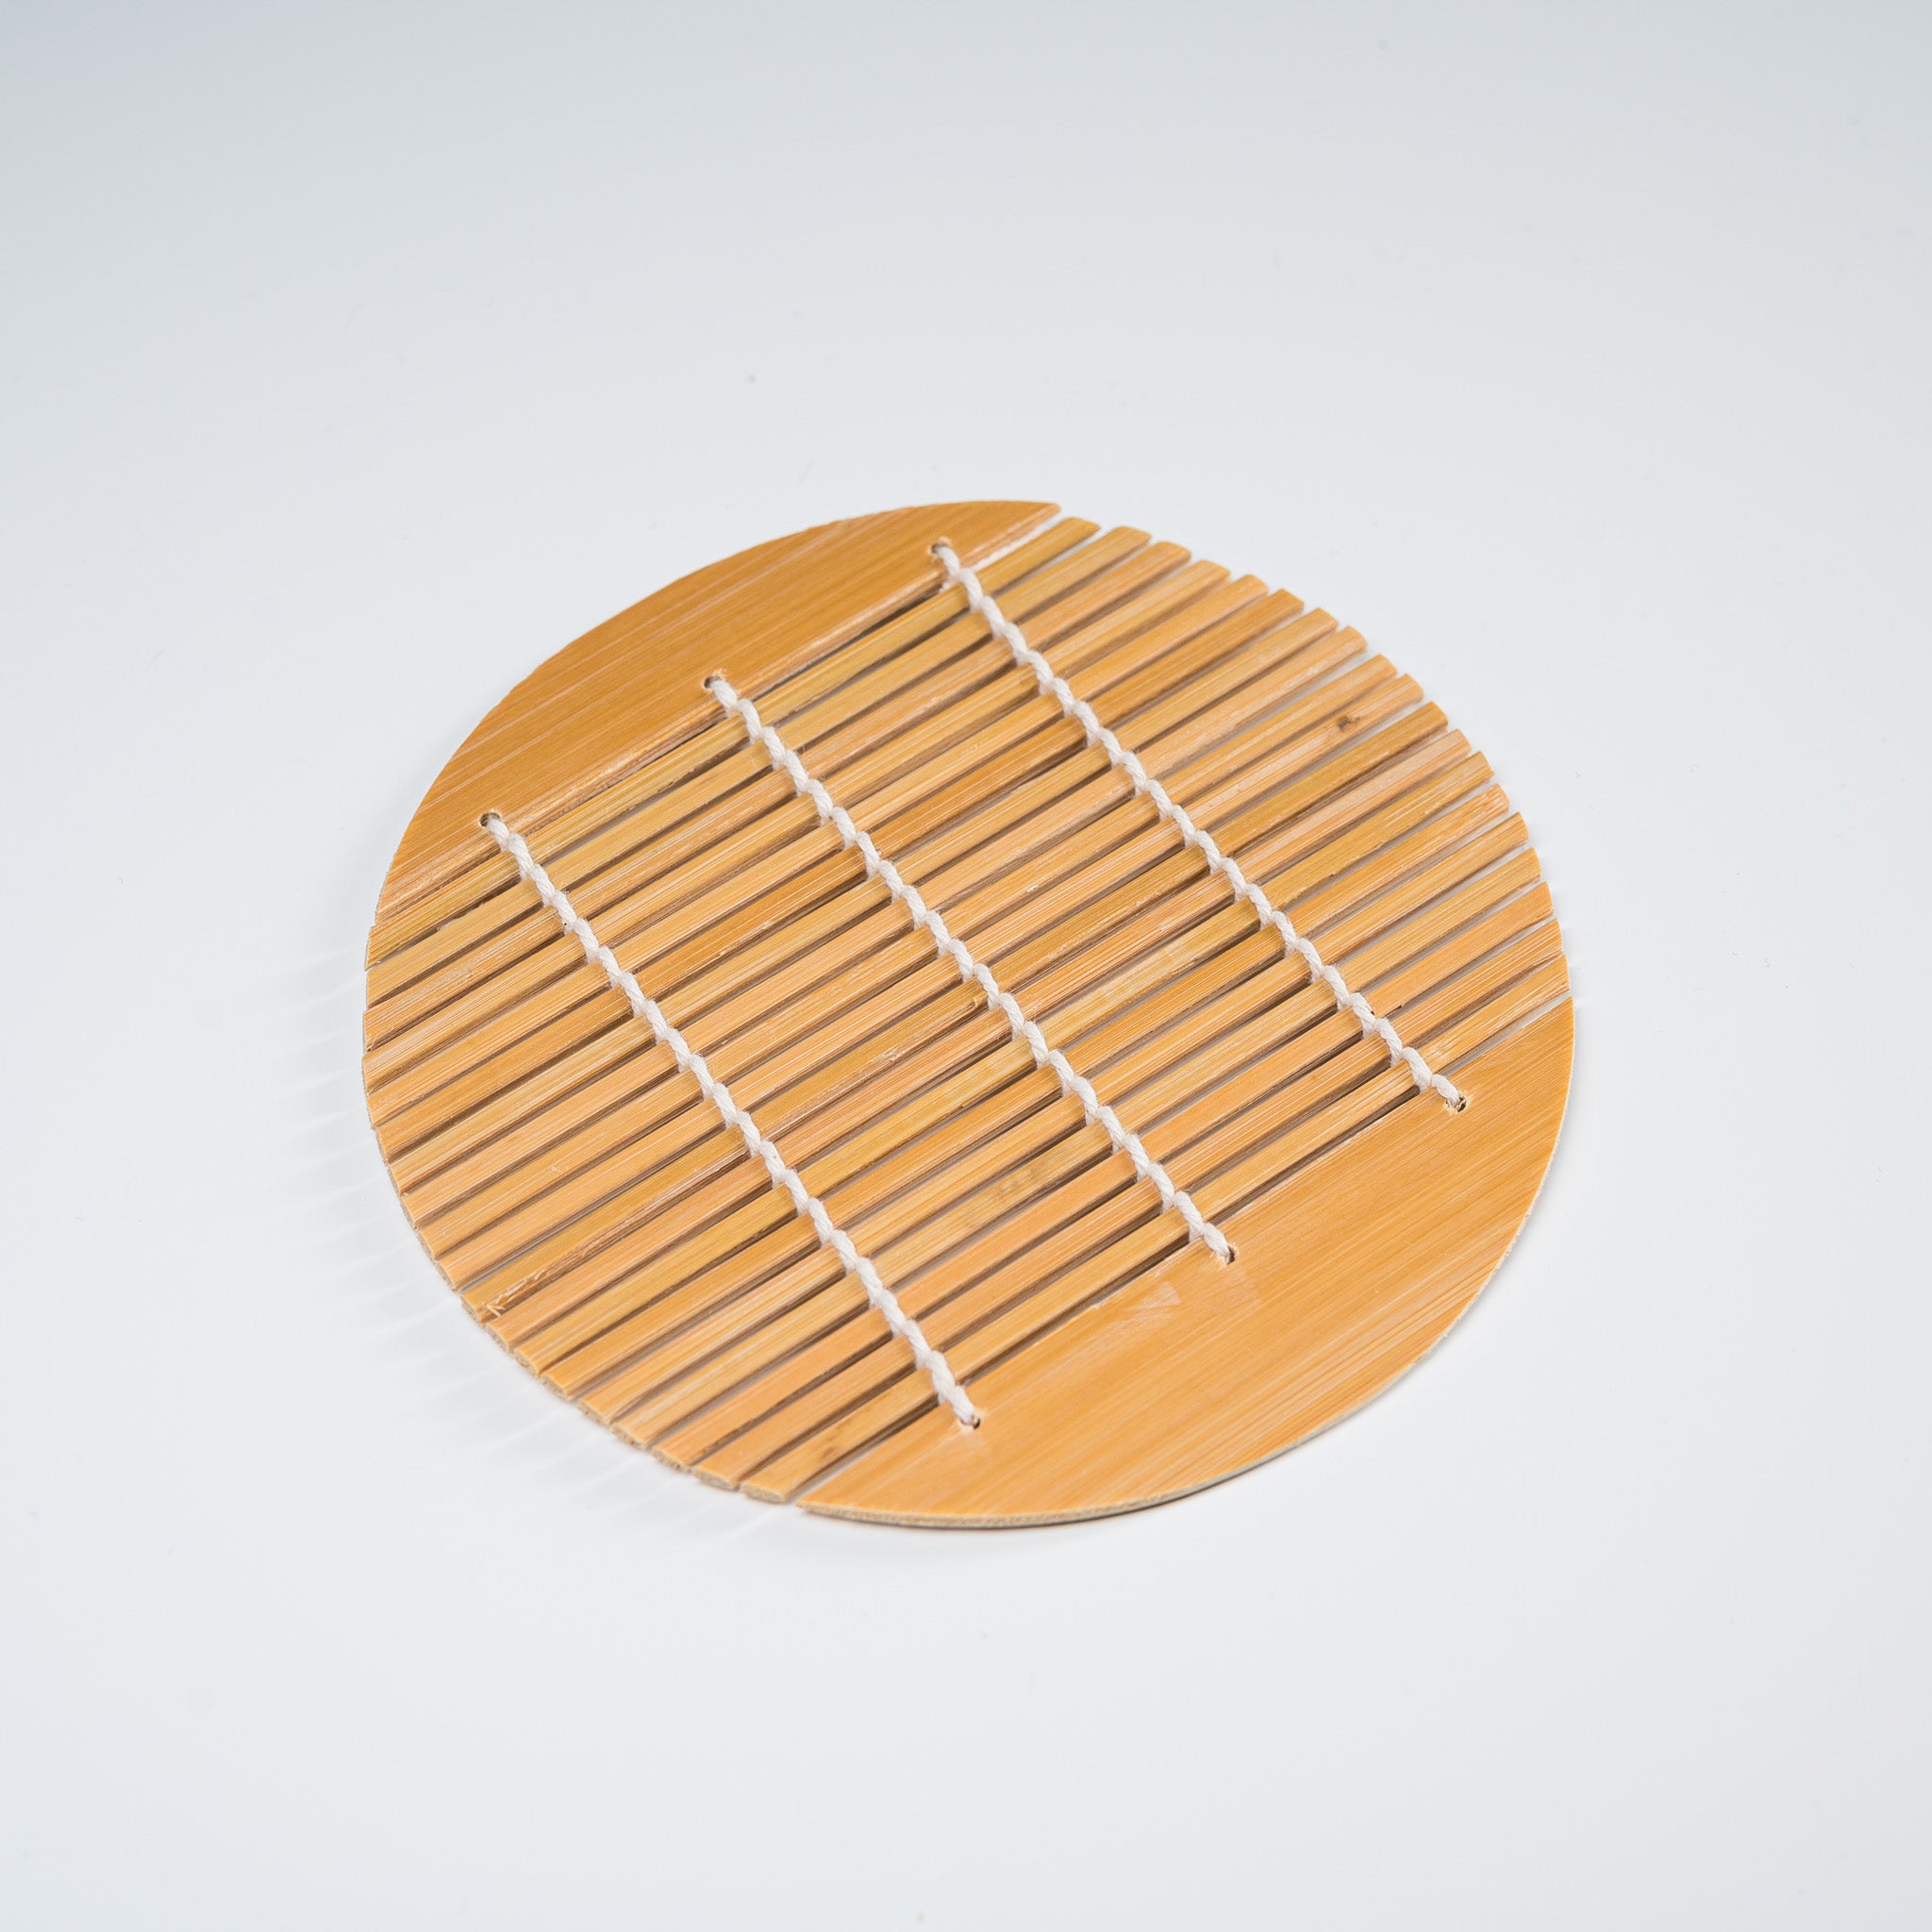 Bamboo Strainer - 2 Sizes Options